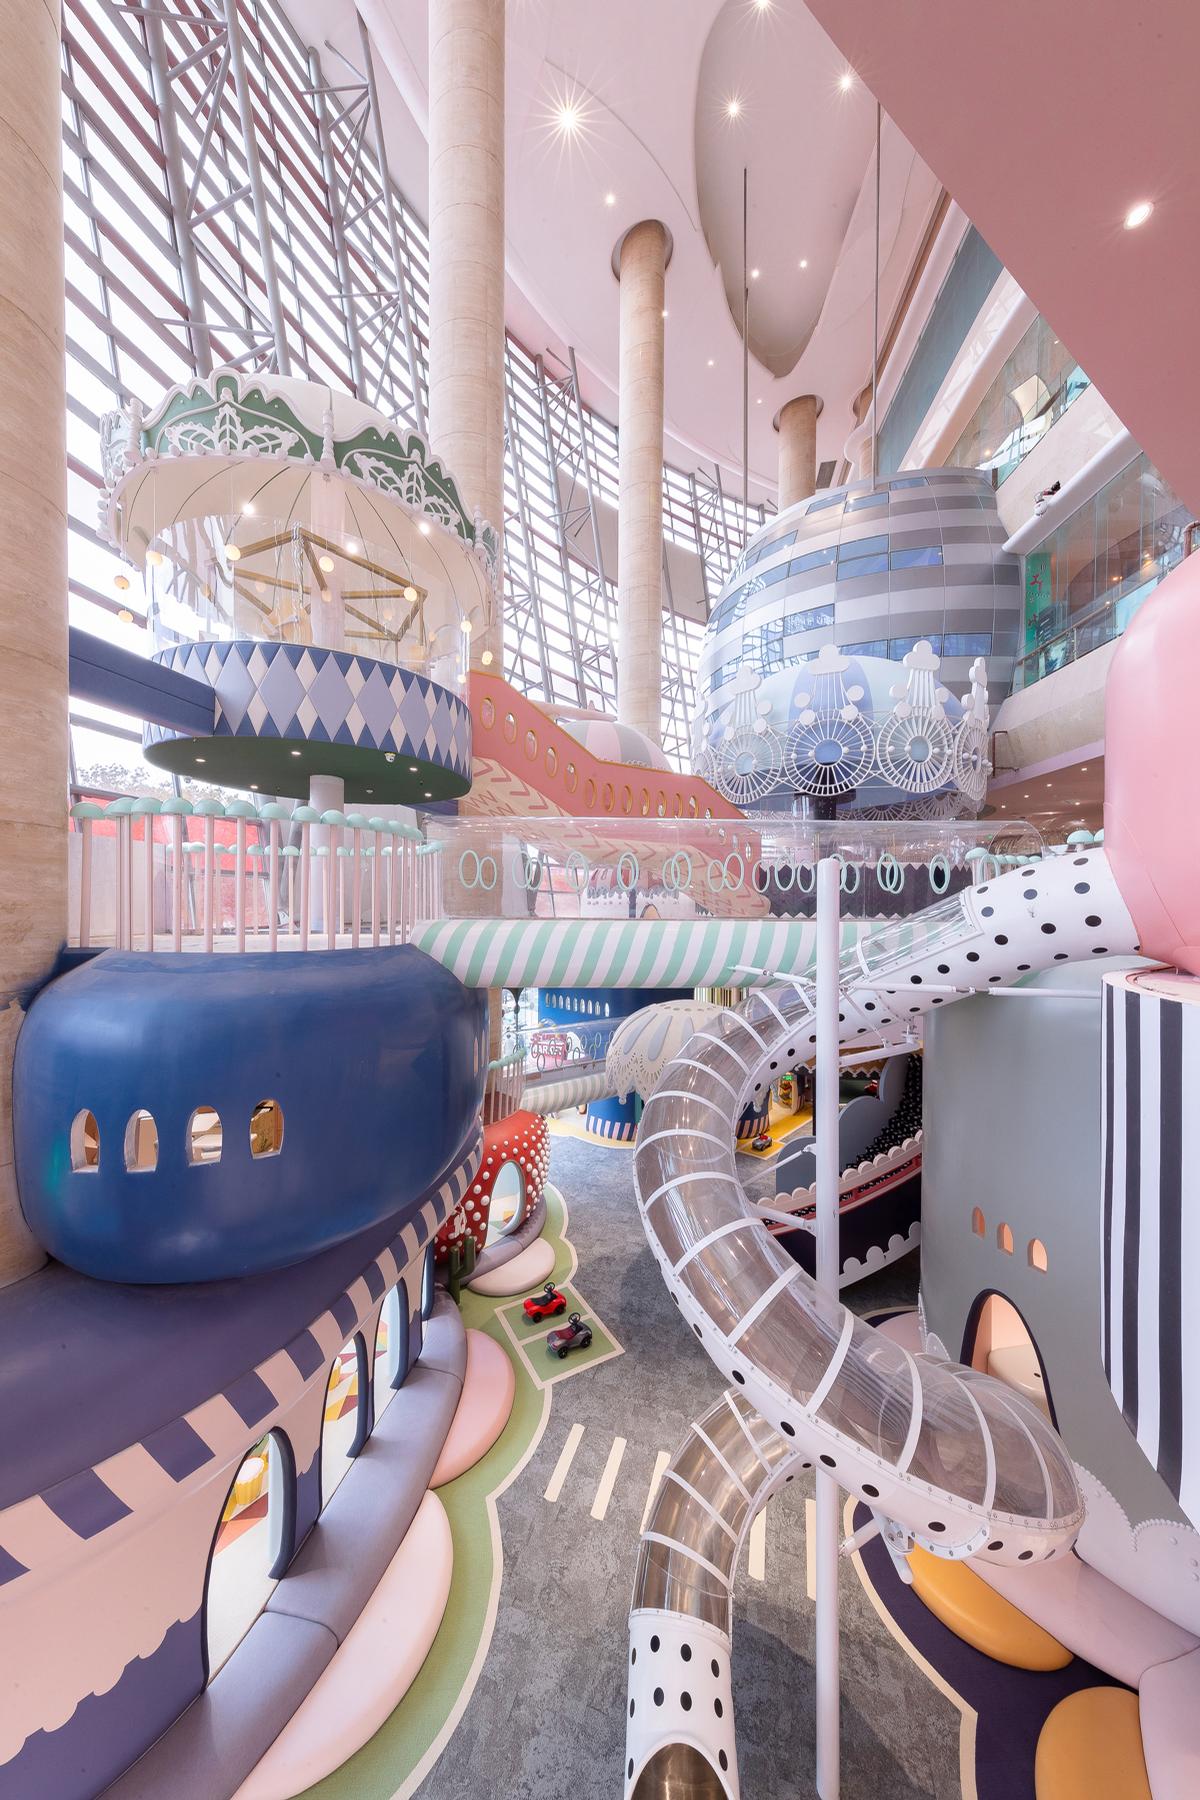 Located partly in the multi-level atrium of a Shenzhen mall, the play space is able to make use of different levels itself / Shao Feng